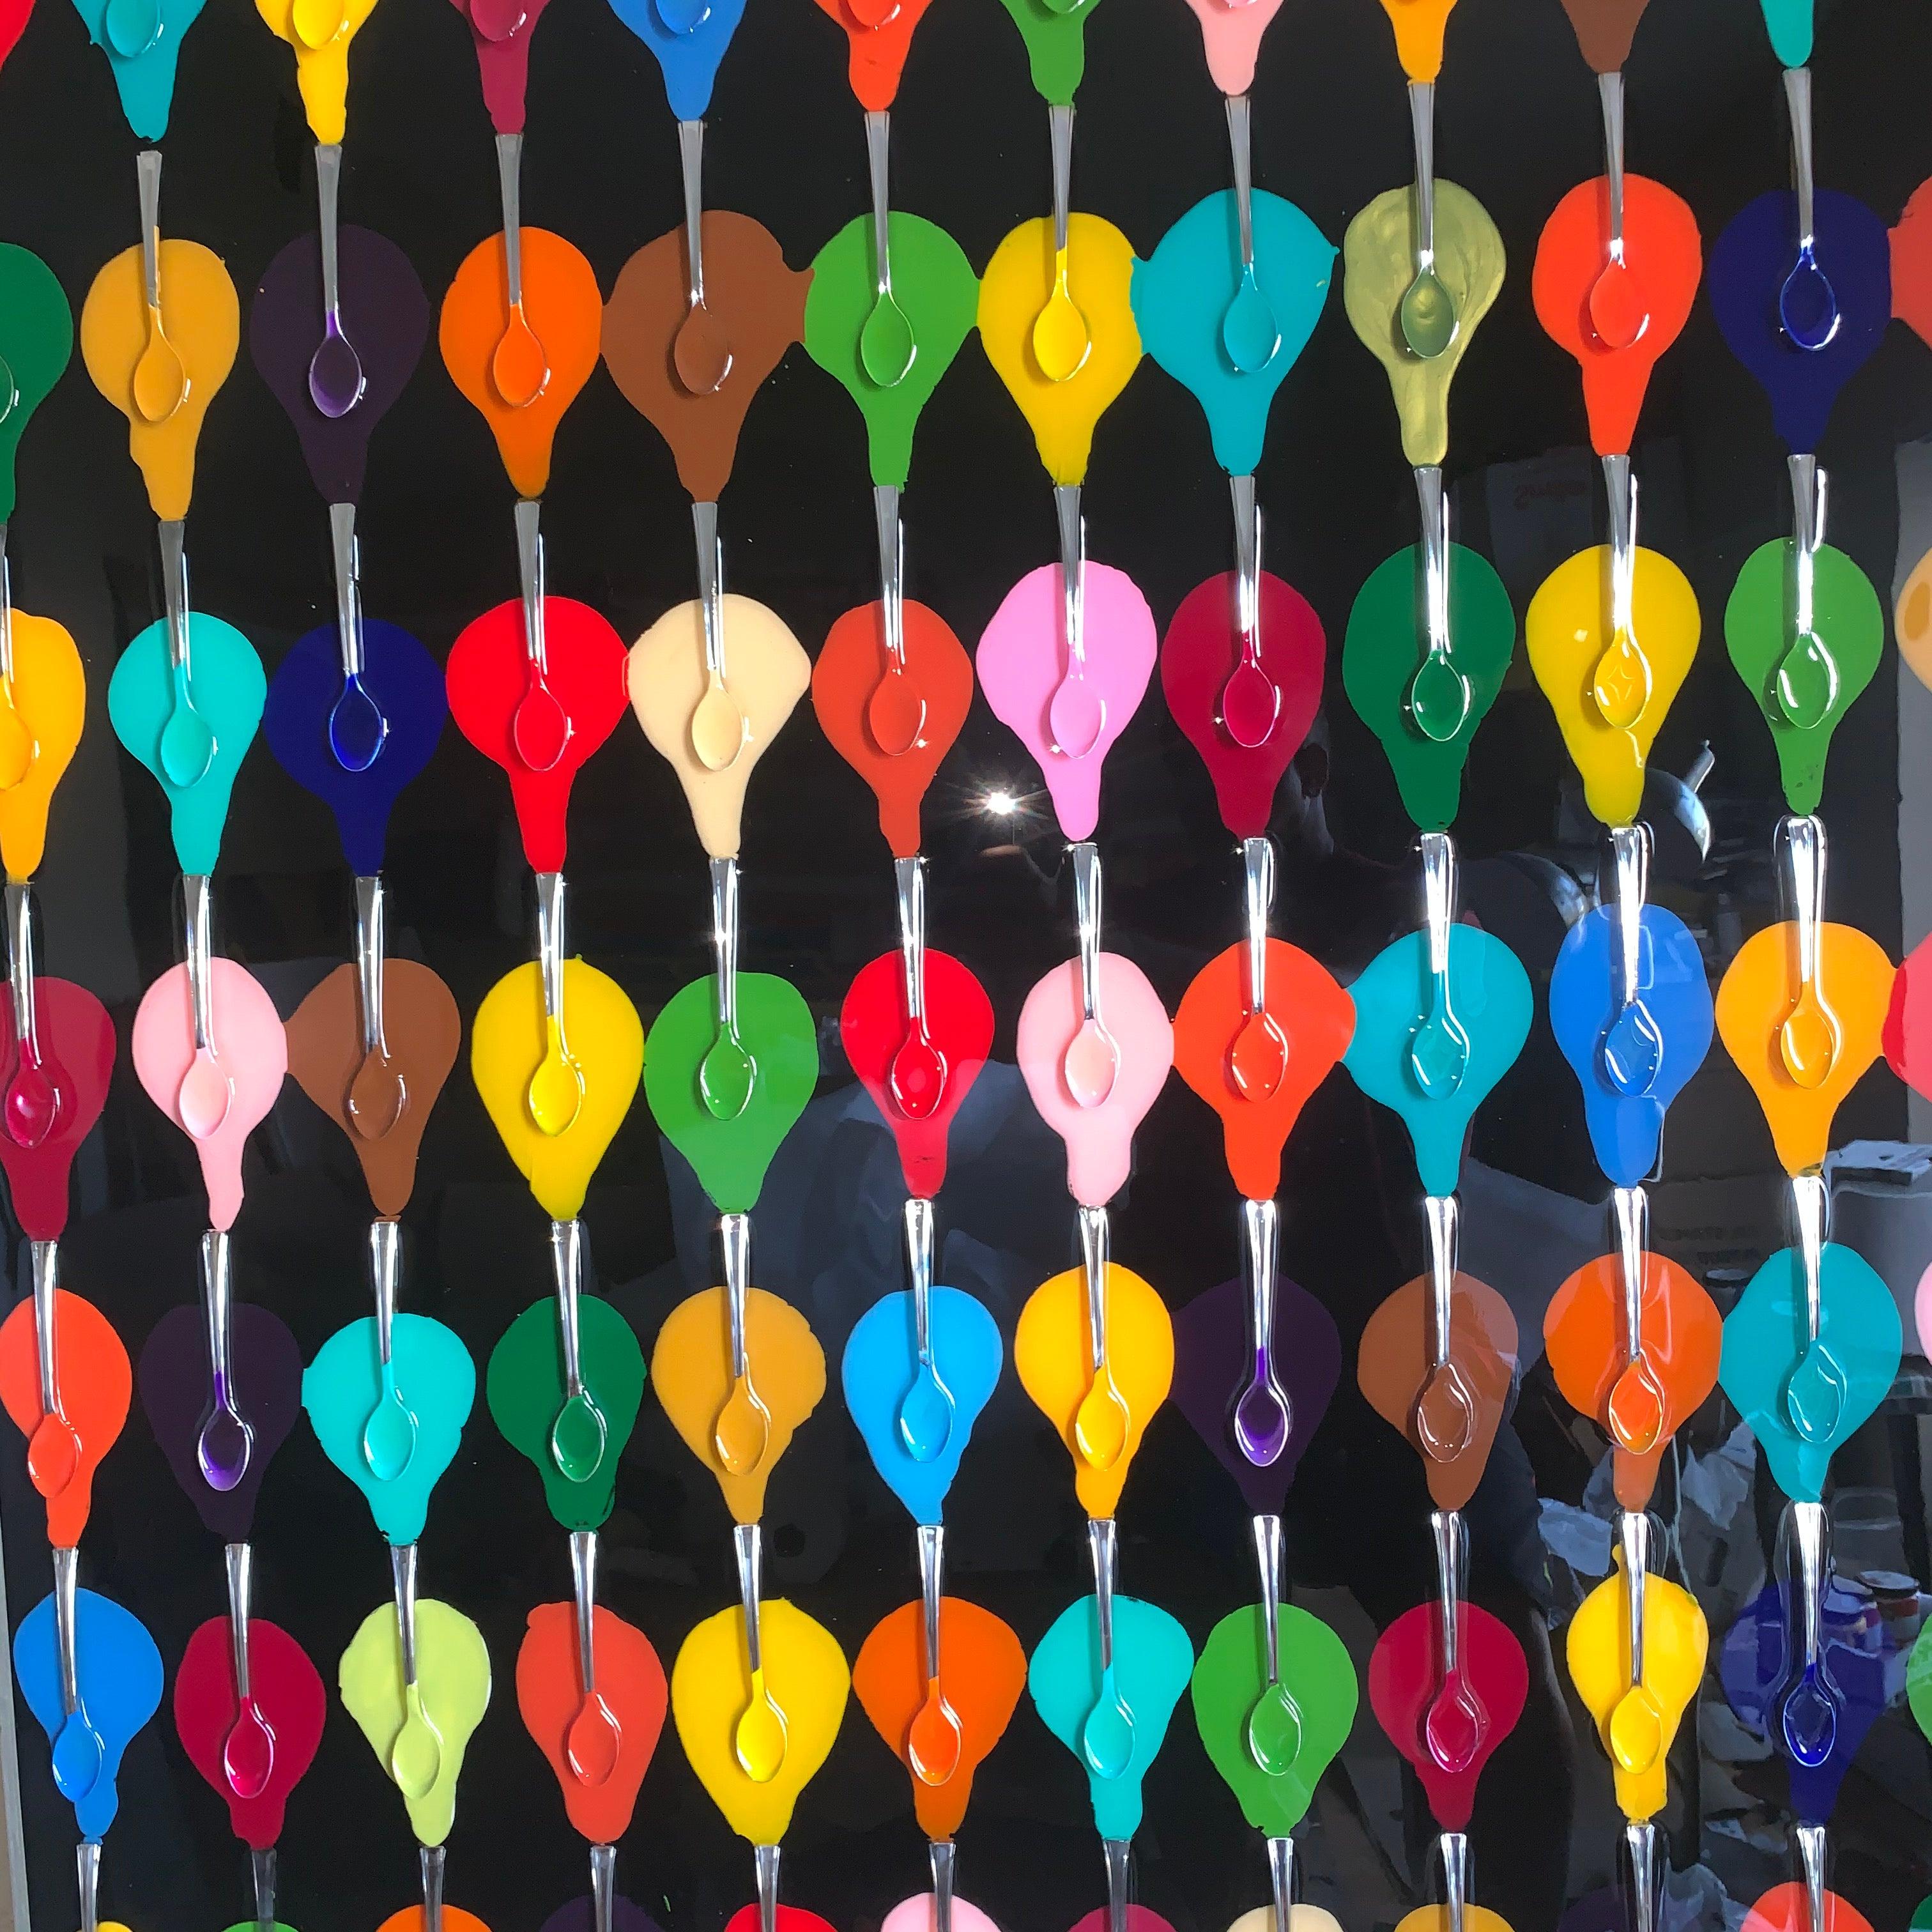 Colorful acrylic paint piece with silver spoons representing all Ice Cream Flavors.
Dedicated to all astronauts  who missed tasting some ice creams up there. 
This piece can be hung both ways: the main and upside down.
A great touch of colors for an